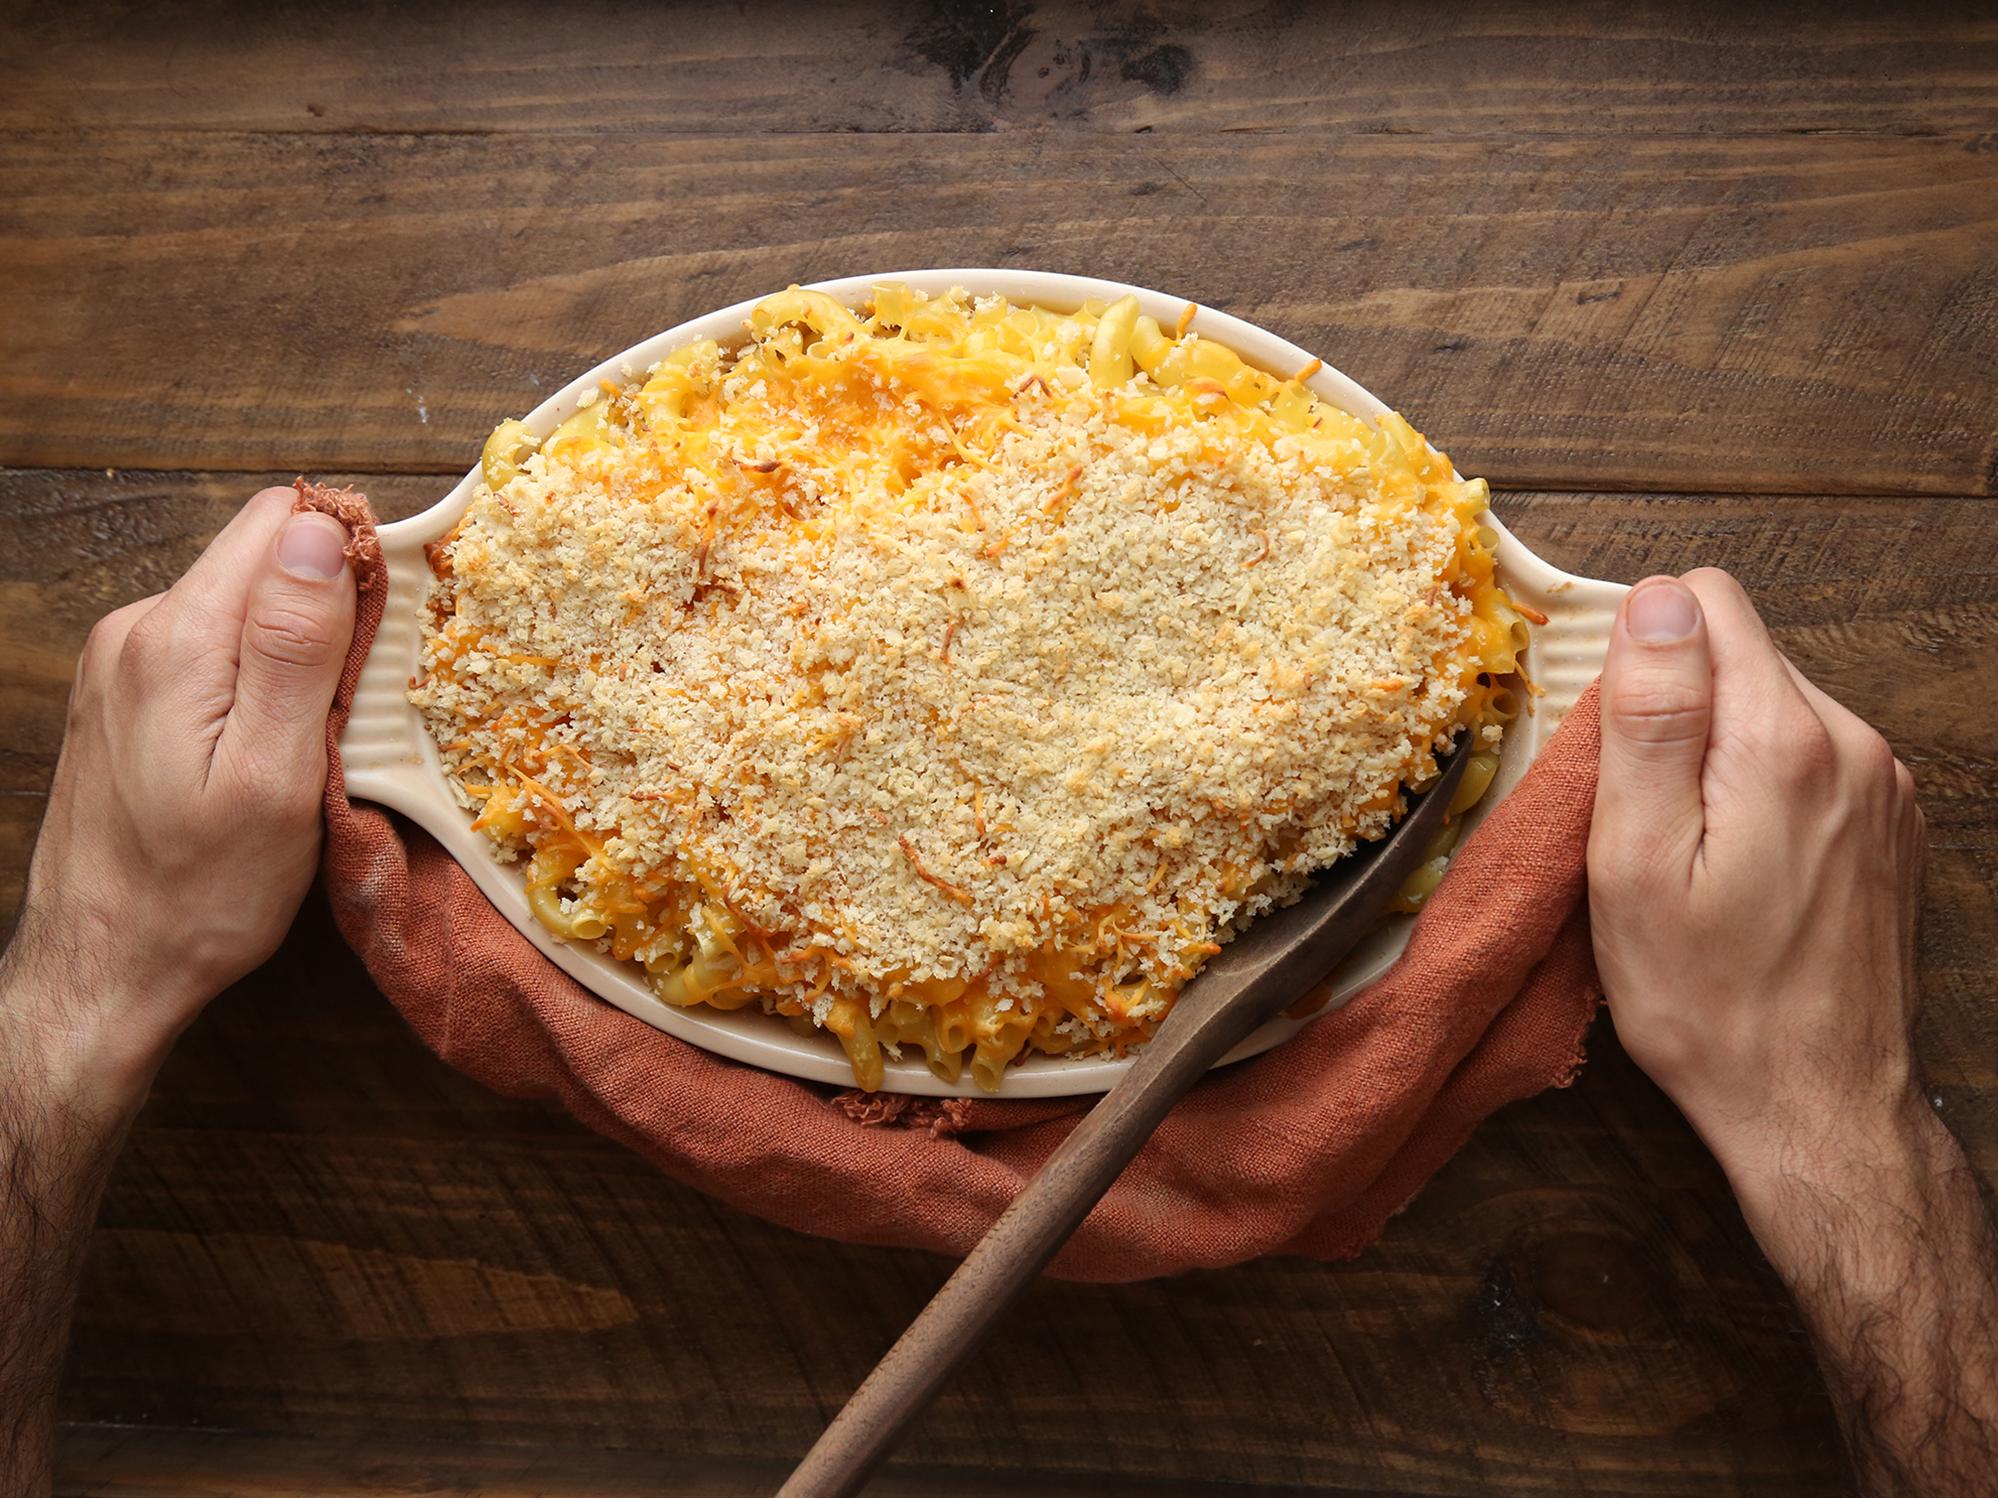  Baked to perfection, this golden Mac and Cheese will be the star of any gathering